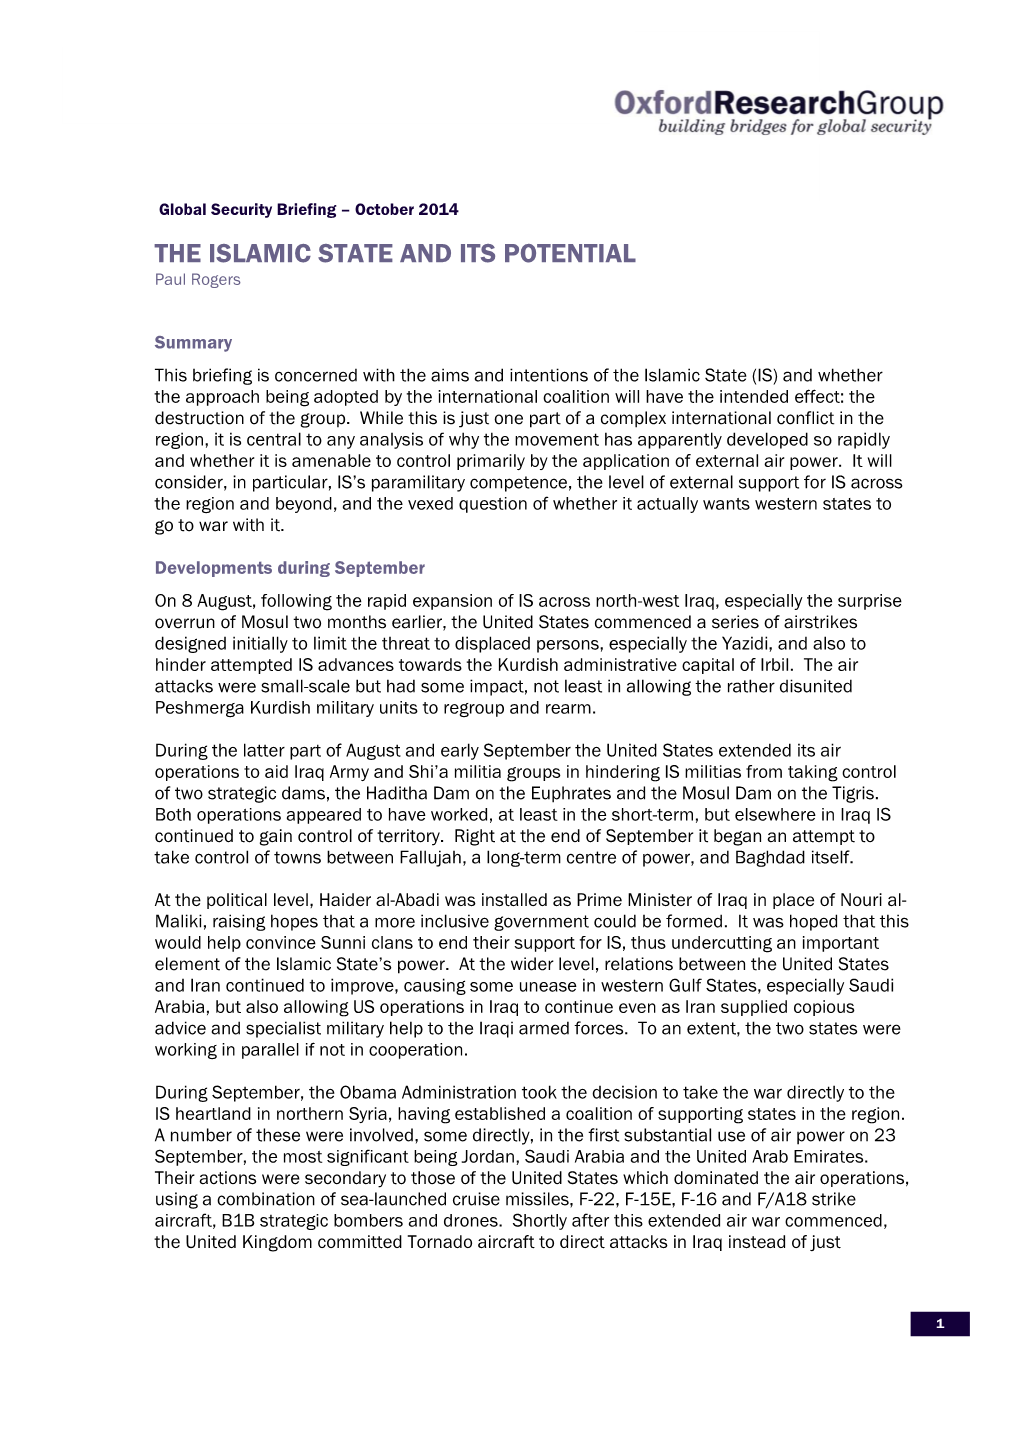 THE ISLAMIC STATE and ITS POTENTIAL Paul Rogers